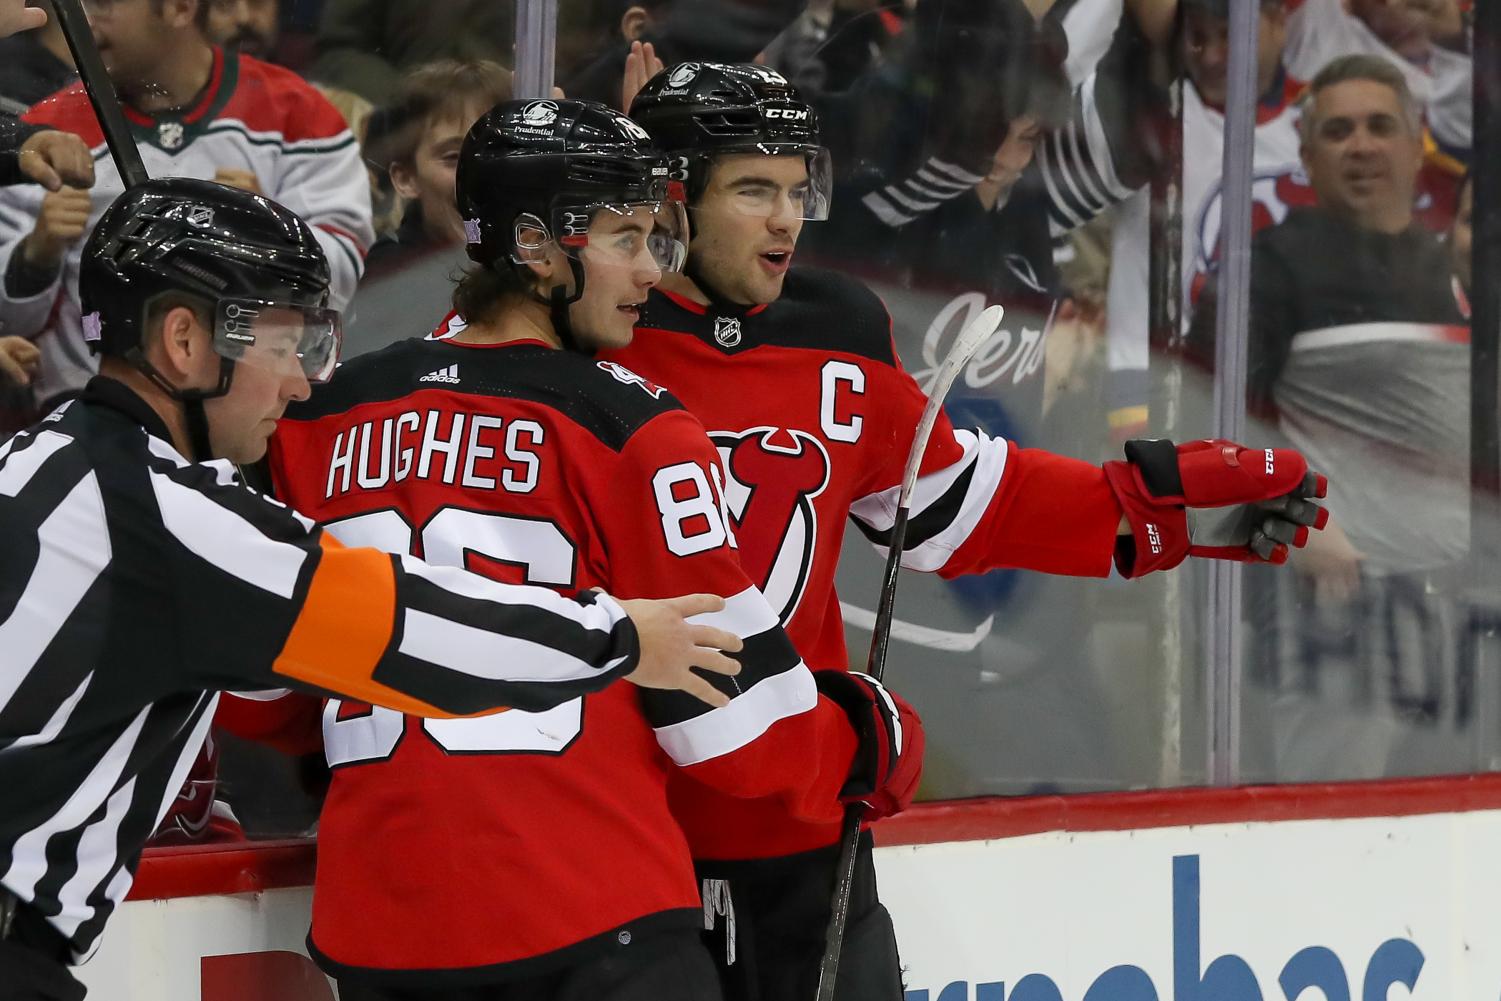 New Jersey Devils fans are back at Prudential Center (Video)